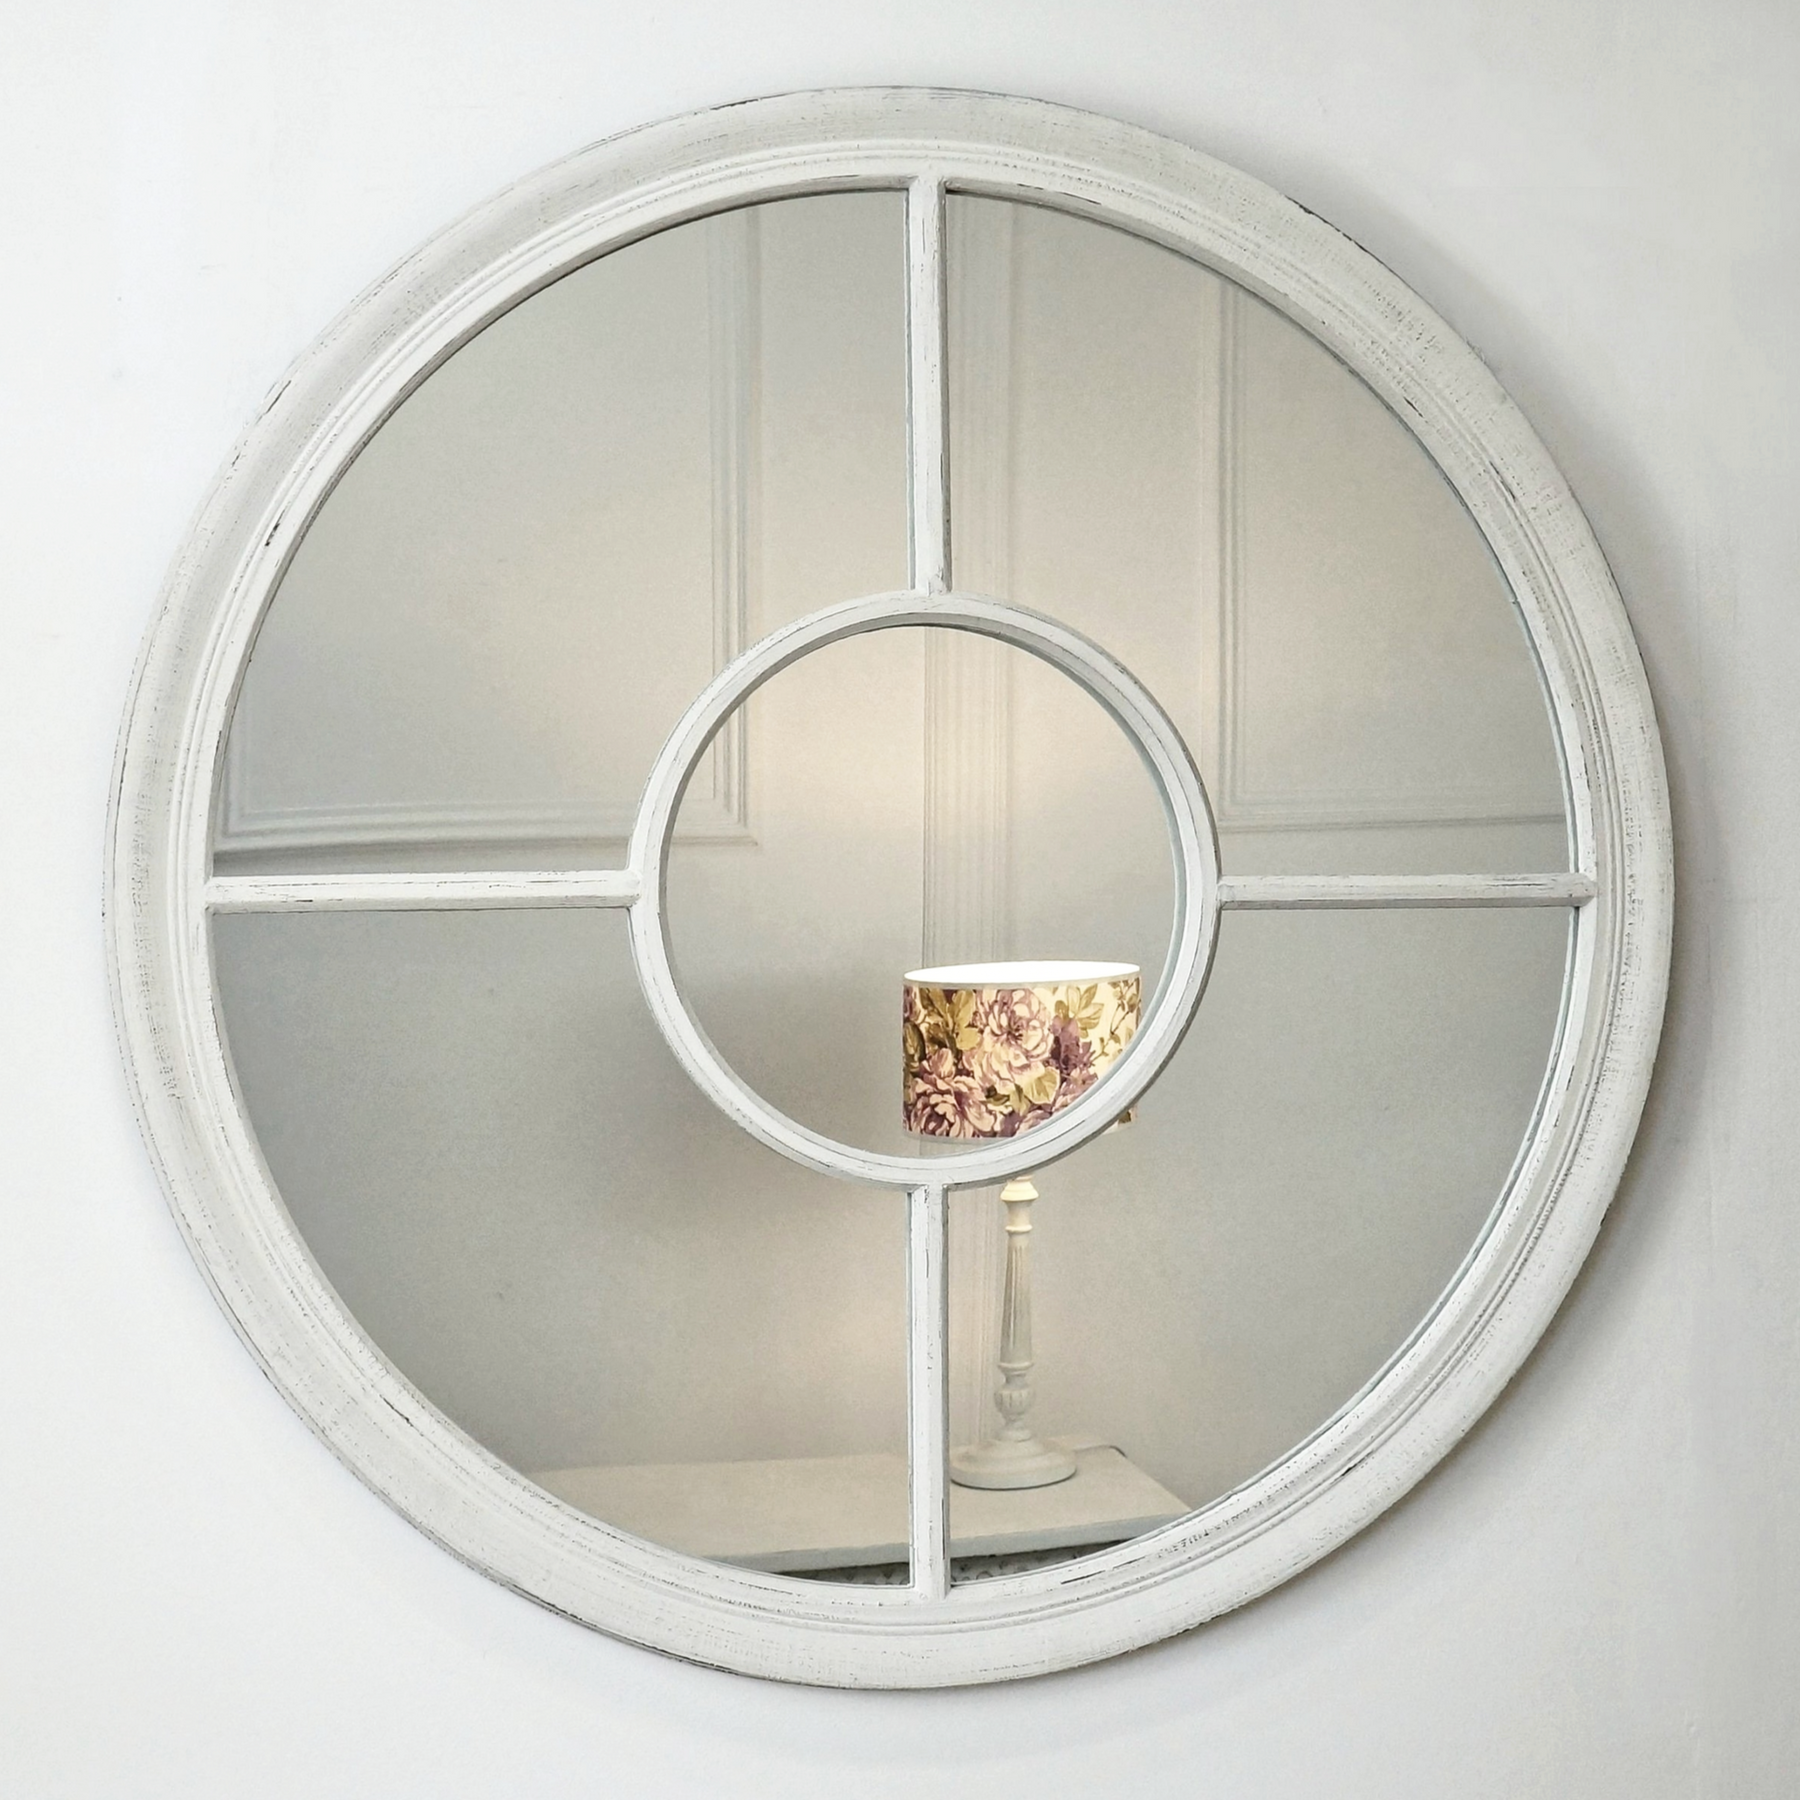 An overall view of this striking mirror in a typical setting.